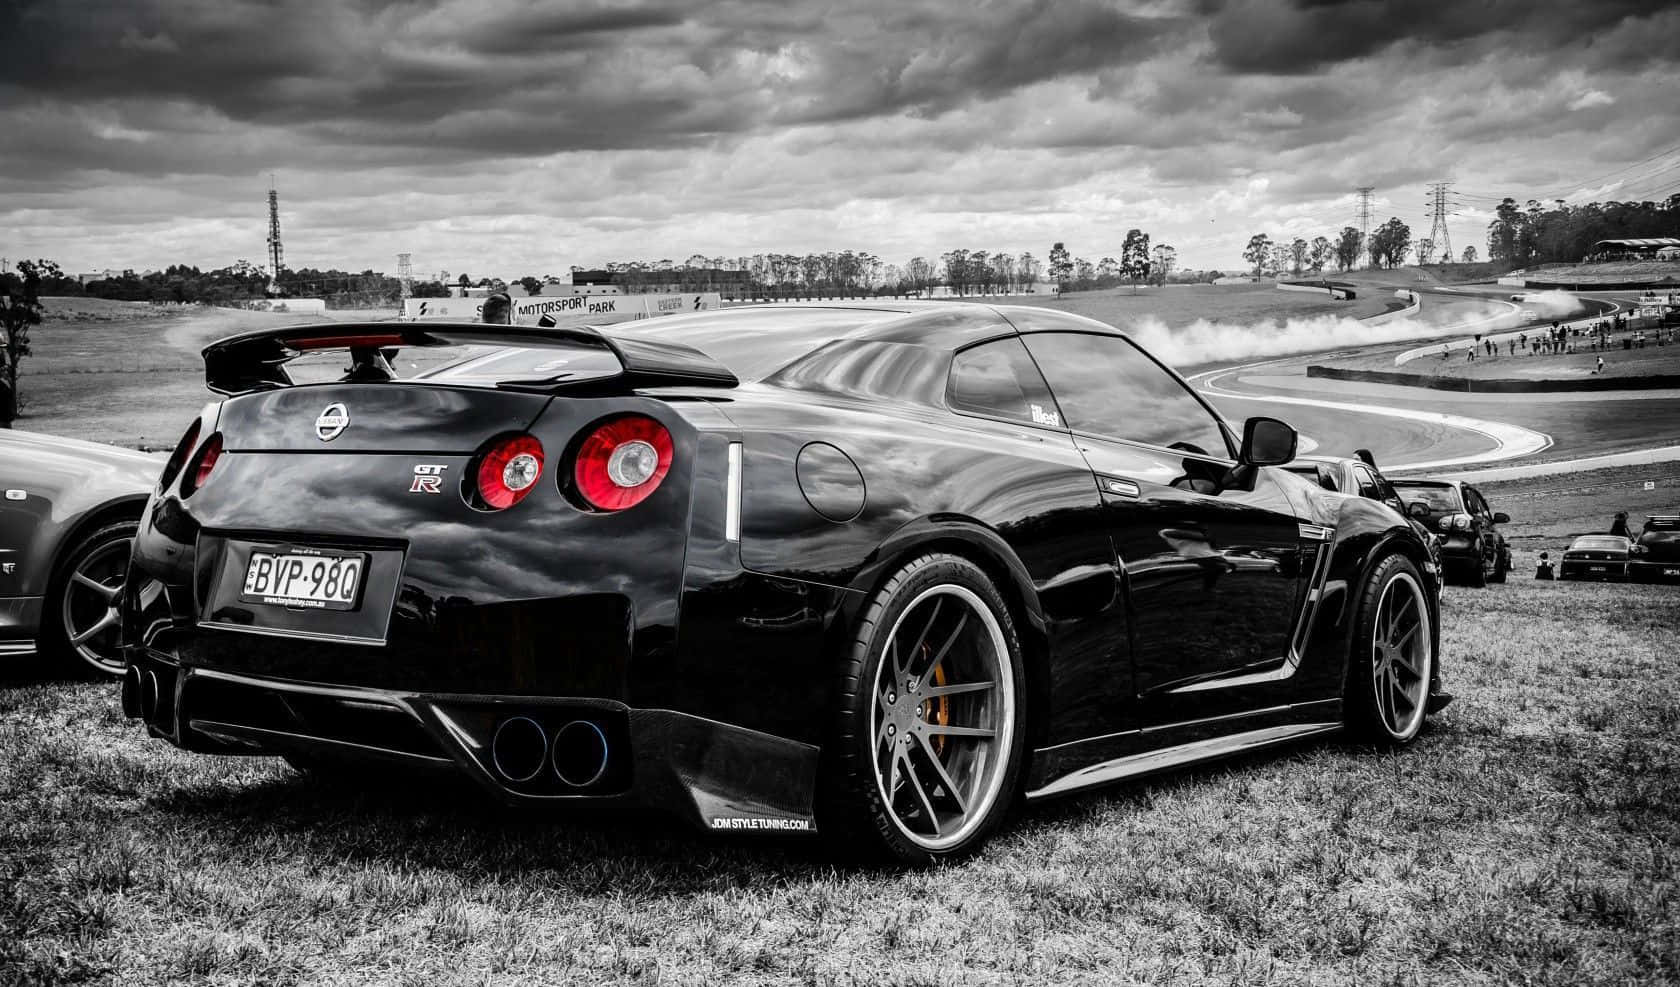 Experience The Pure Exhilaration Of Speeding Down The Highway In The Stylish Cool Gtr.